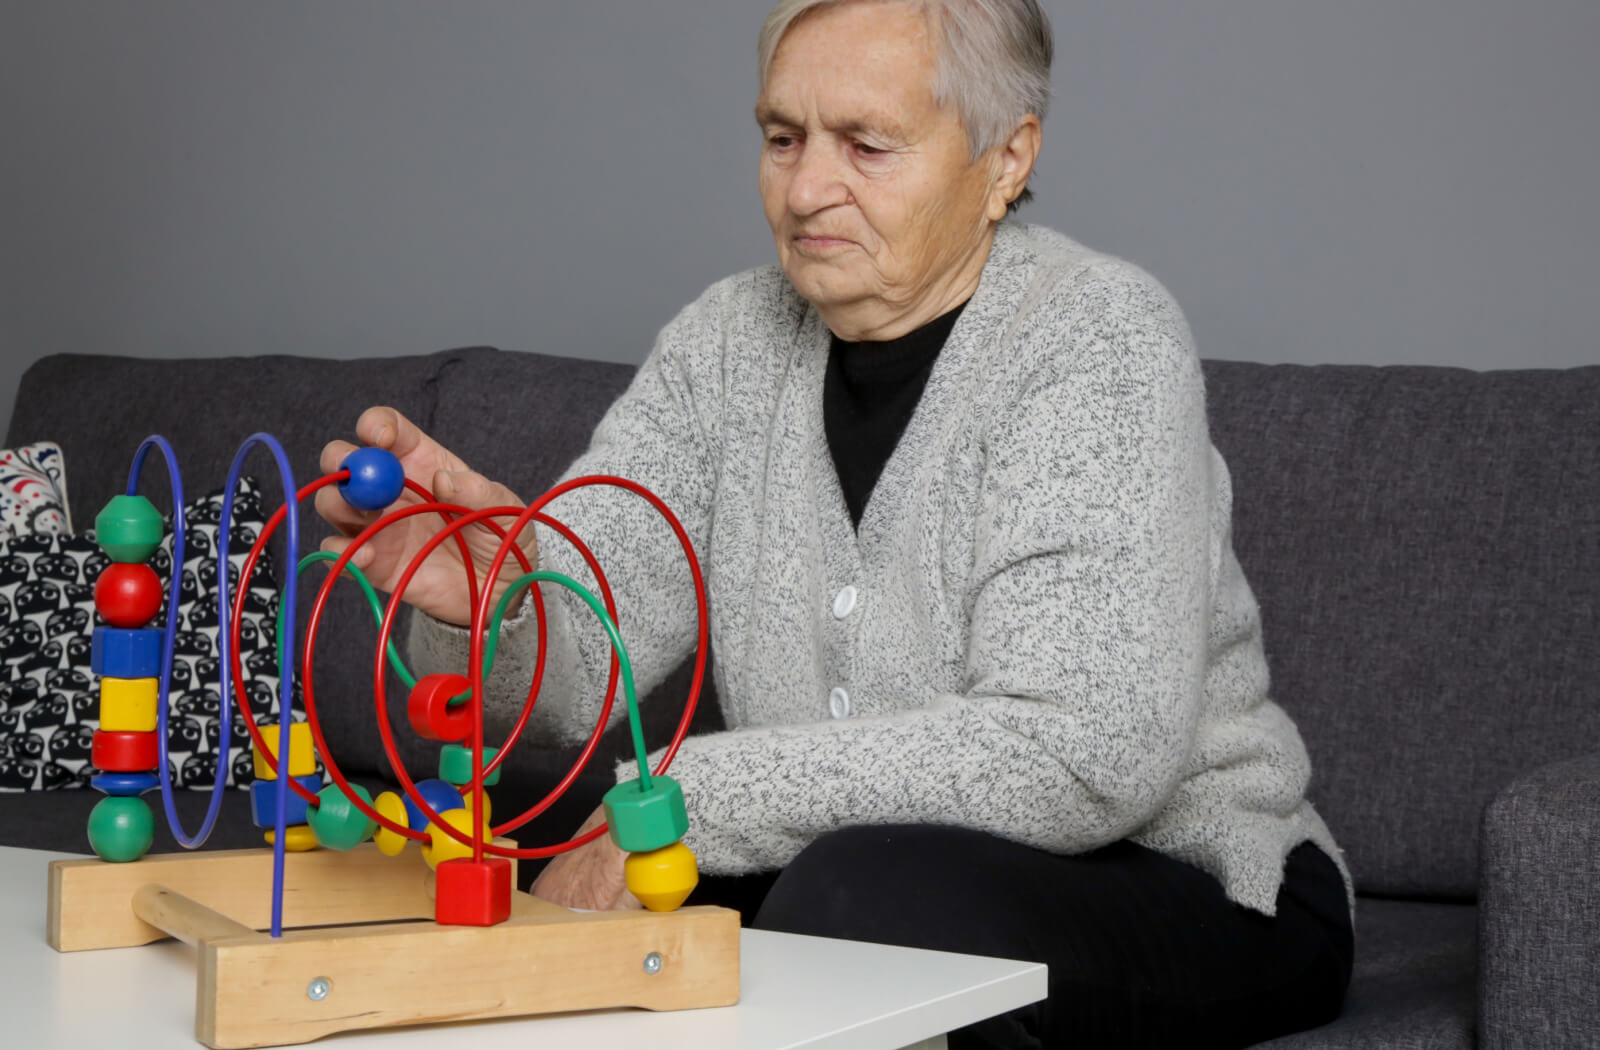 An older adult undergoing cognitive stimulation therapy.
